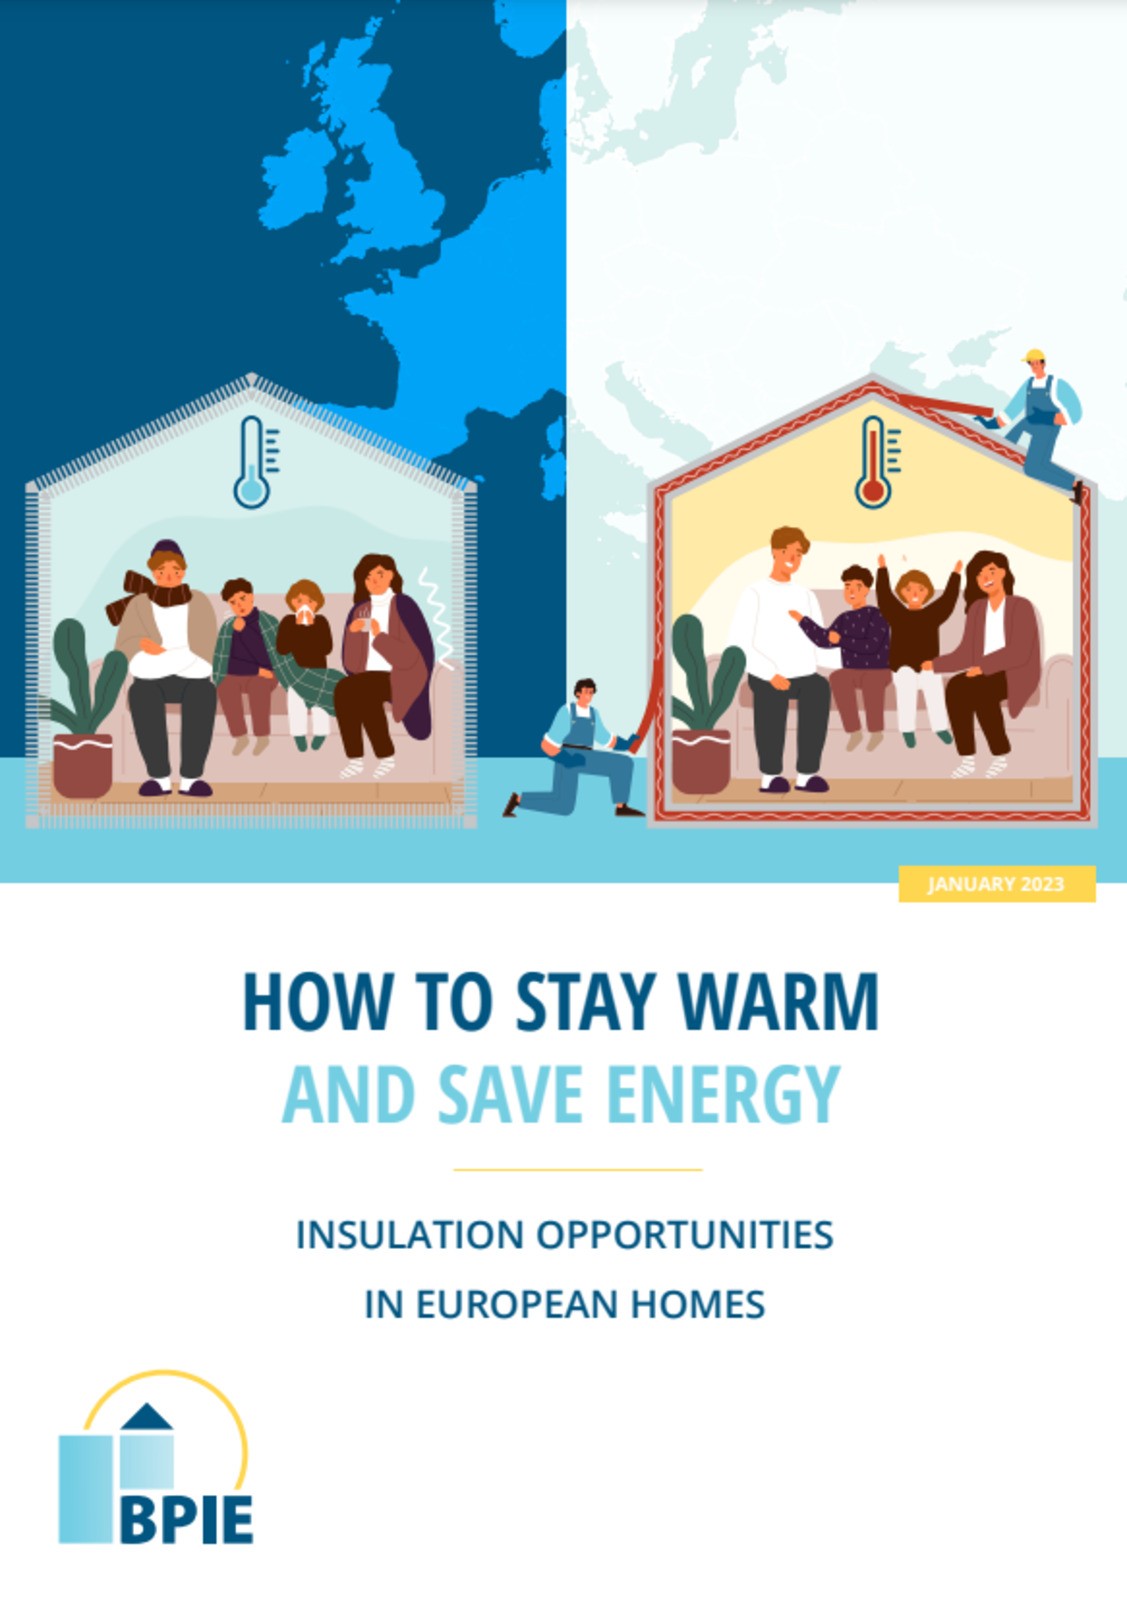 How to stay warm and save energy: Insulation opportunities in European homes